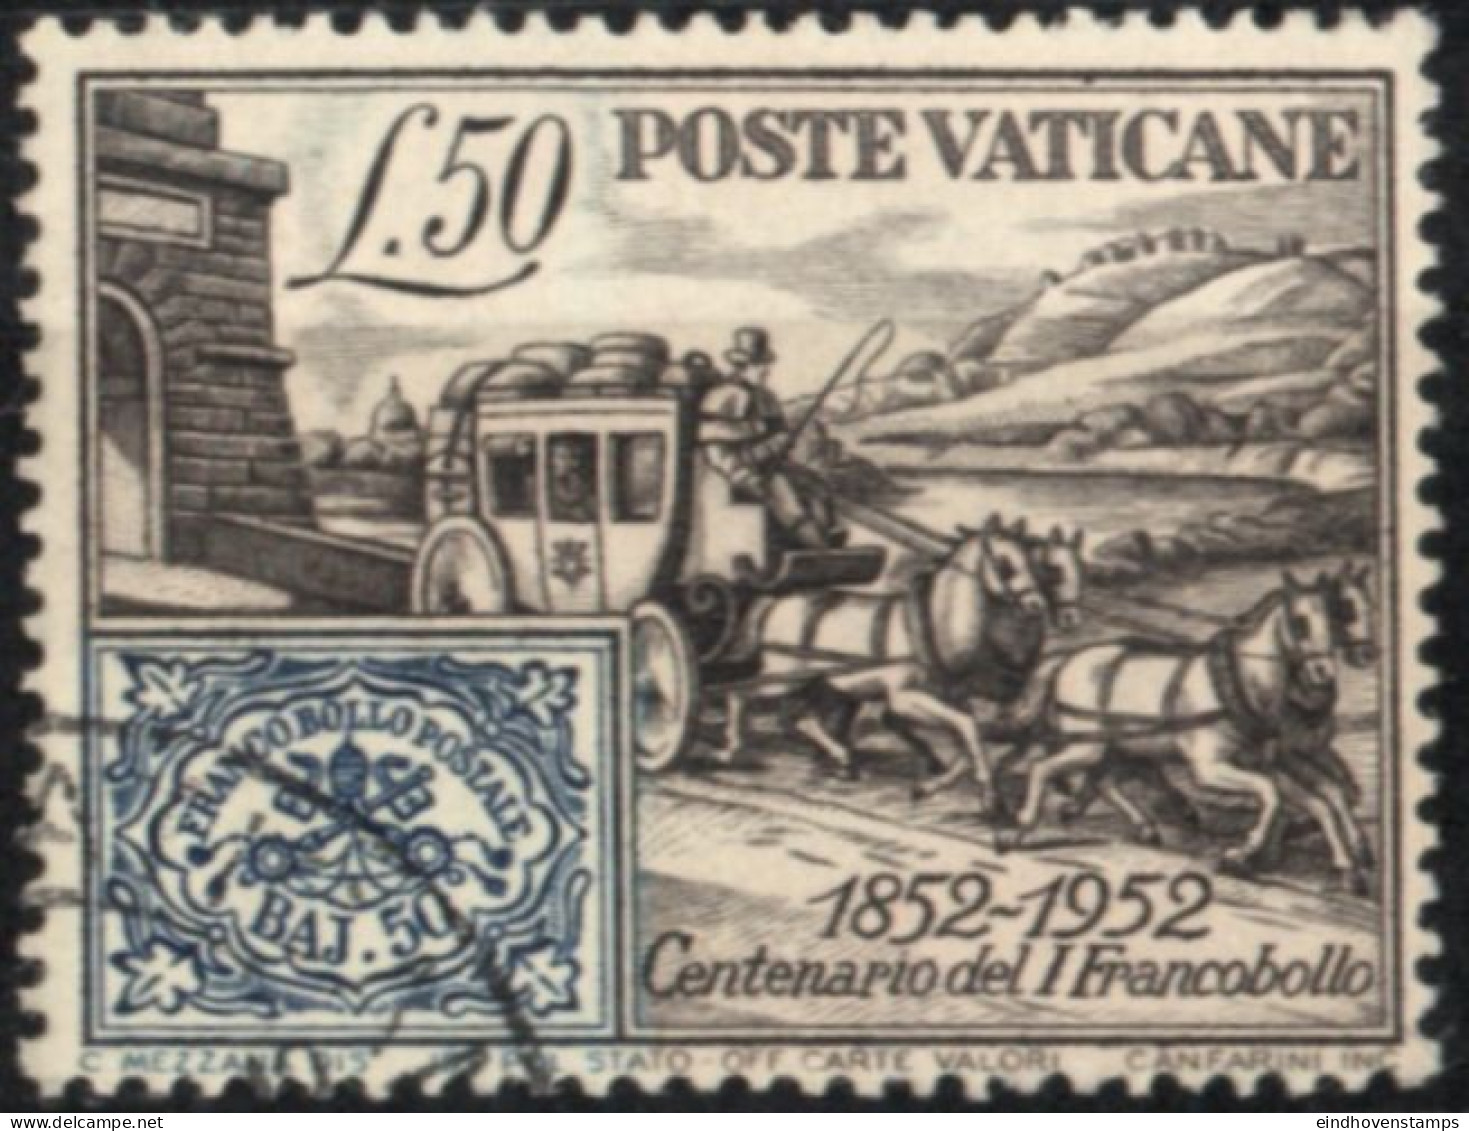 Vatican 1952 100 Year Vatican Stamps 1 Value Cancelled Horse Drawn Mail Coach - Unused Stamps